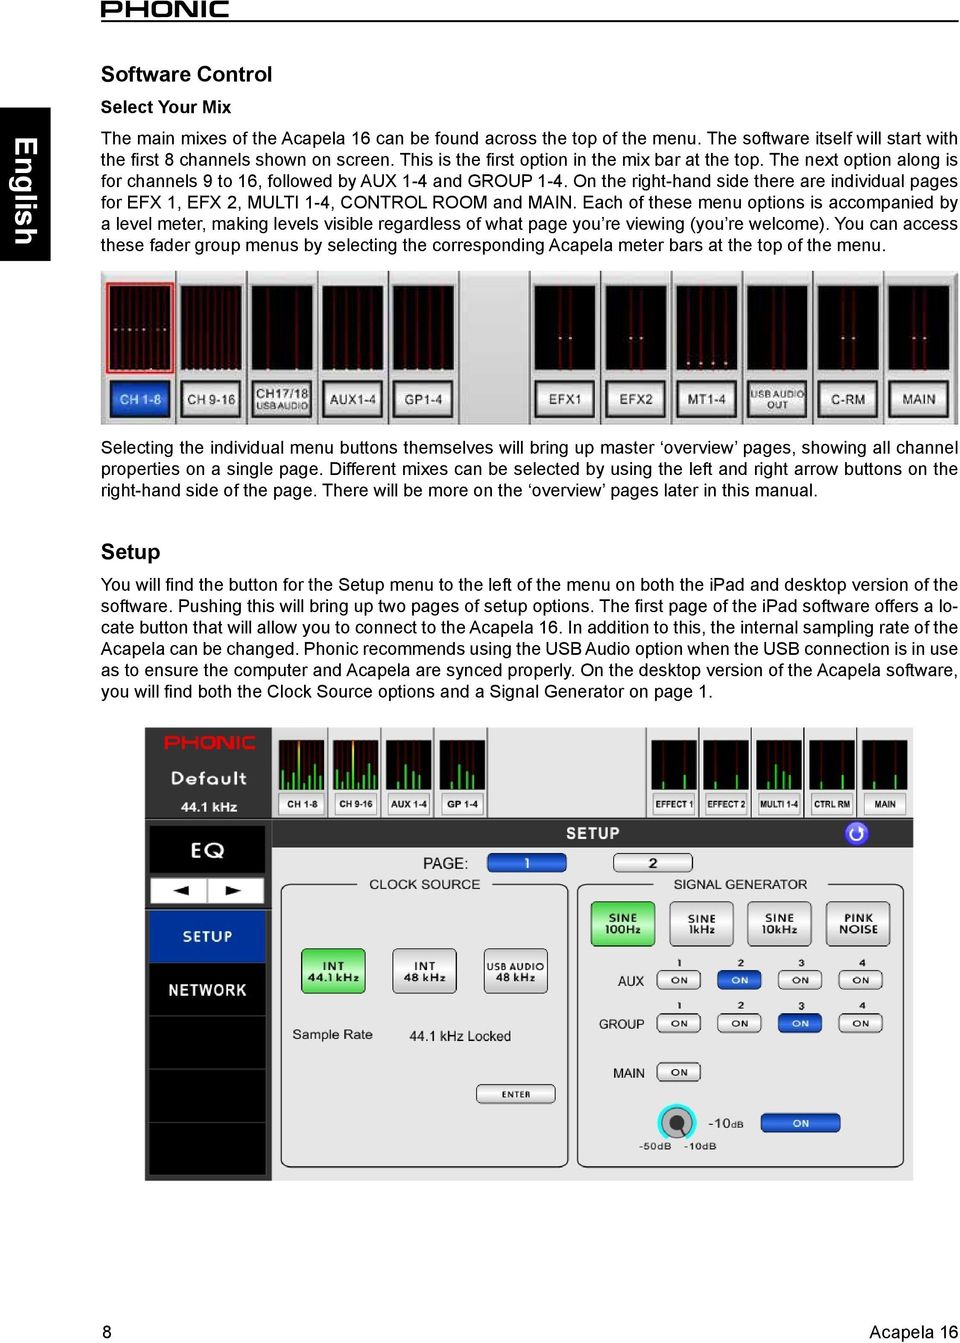 On the right-hand side there are individual pages for EFX 1, EFX 2, MULTI 1-4, CONTROL ROOM and MAIN.